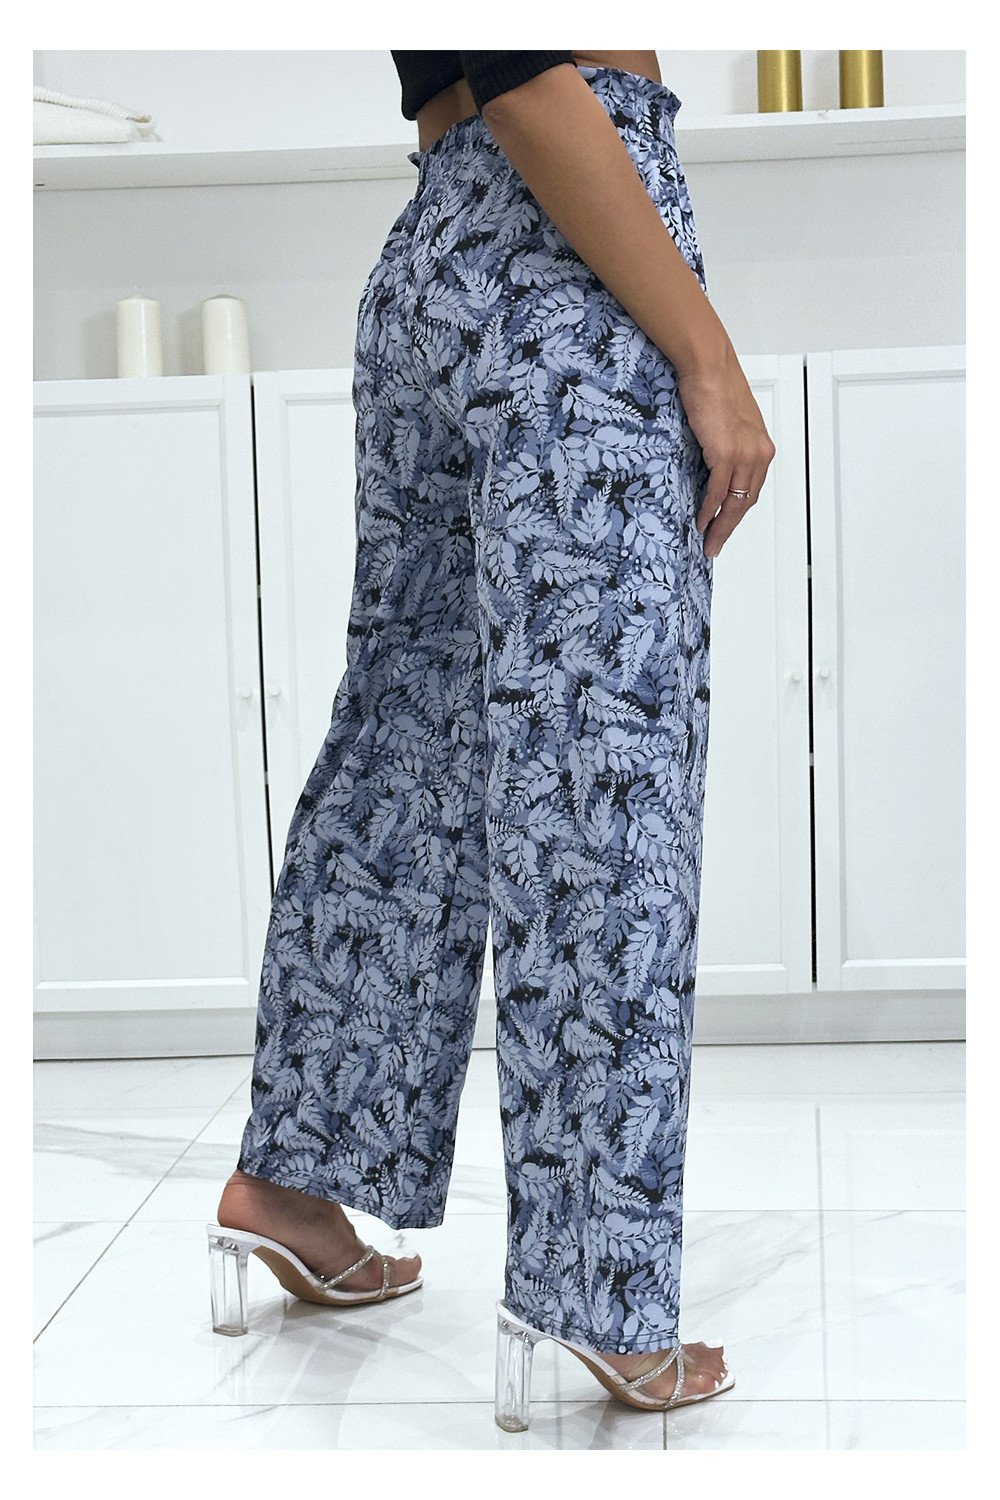 Palazzo pants with pretty navy leaf pattern